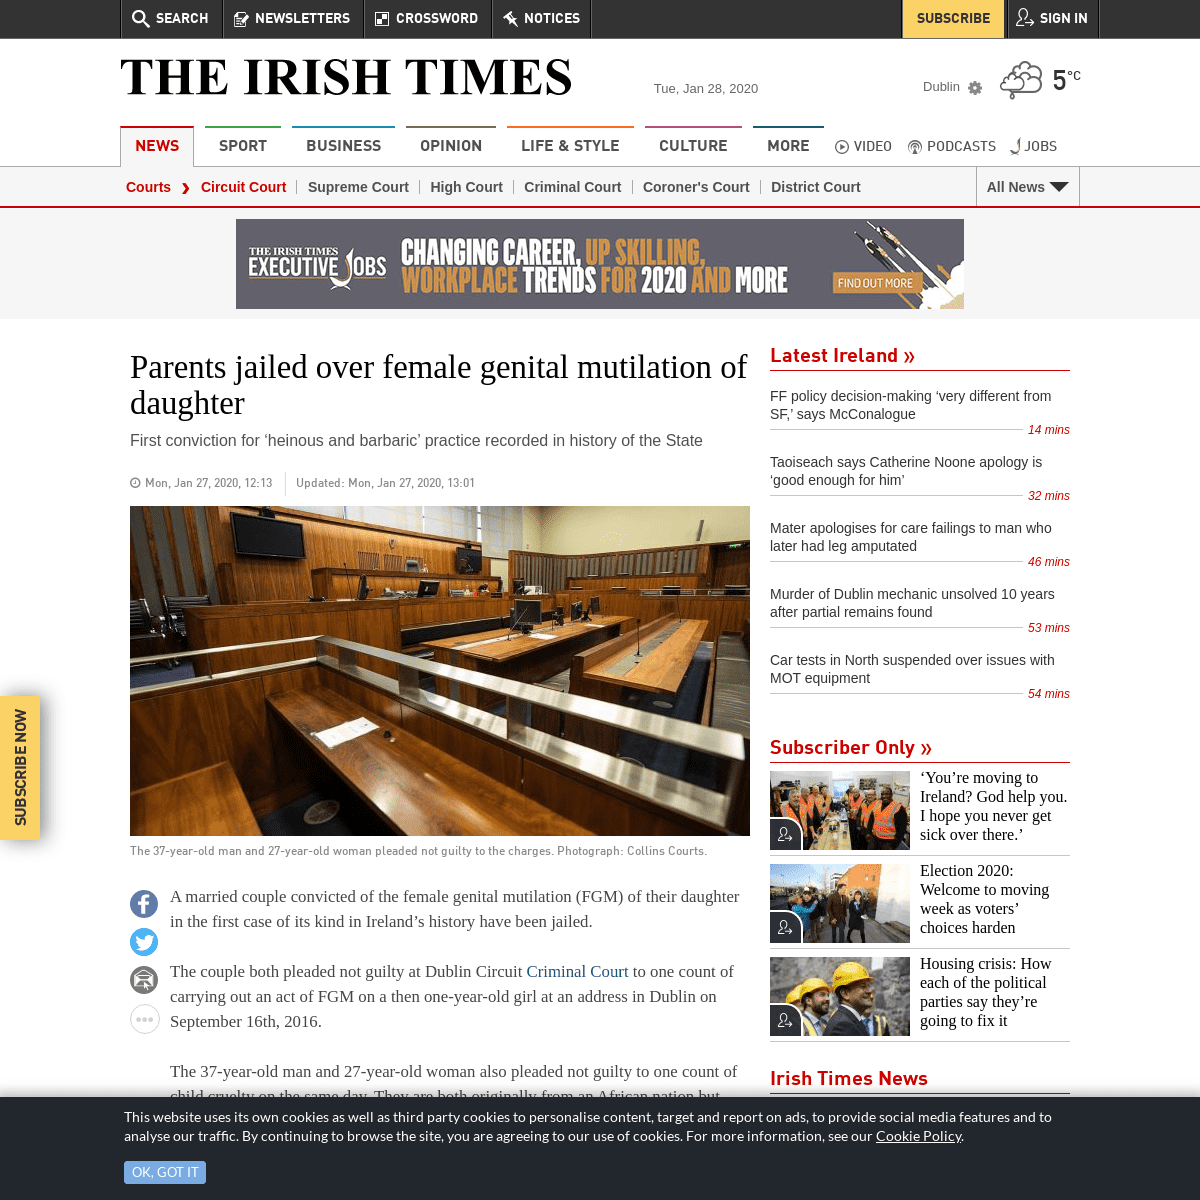 A complete backup of www.irishtimes.com/news/crime-and-law/courts/circuit-court/parents-jailed-over-female-genital-mutilation-of